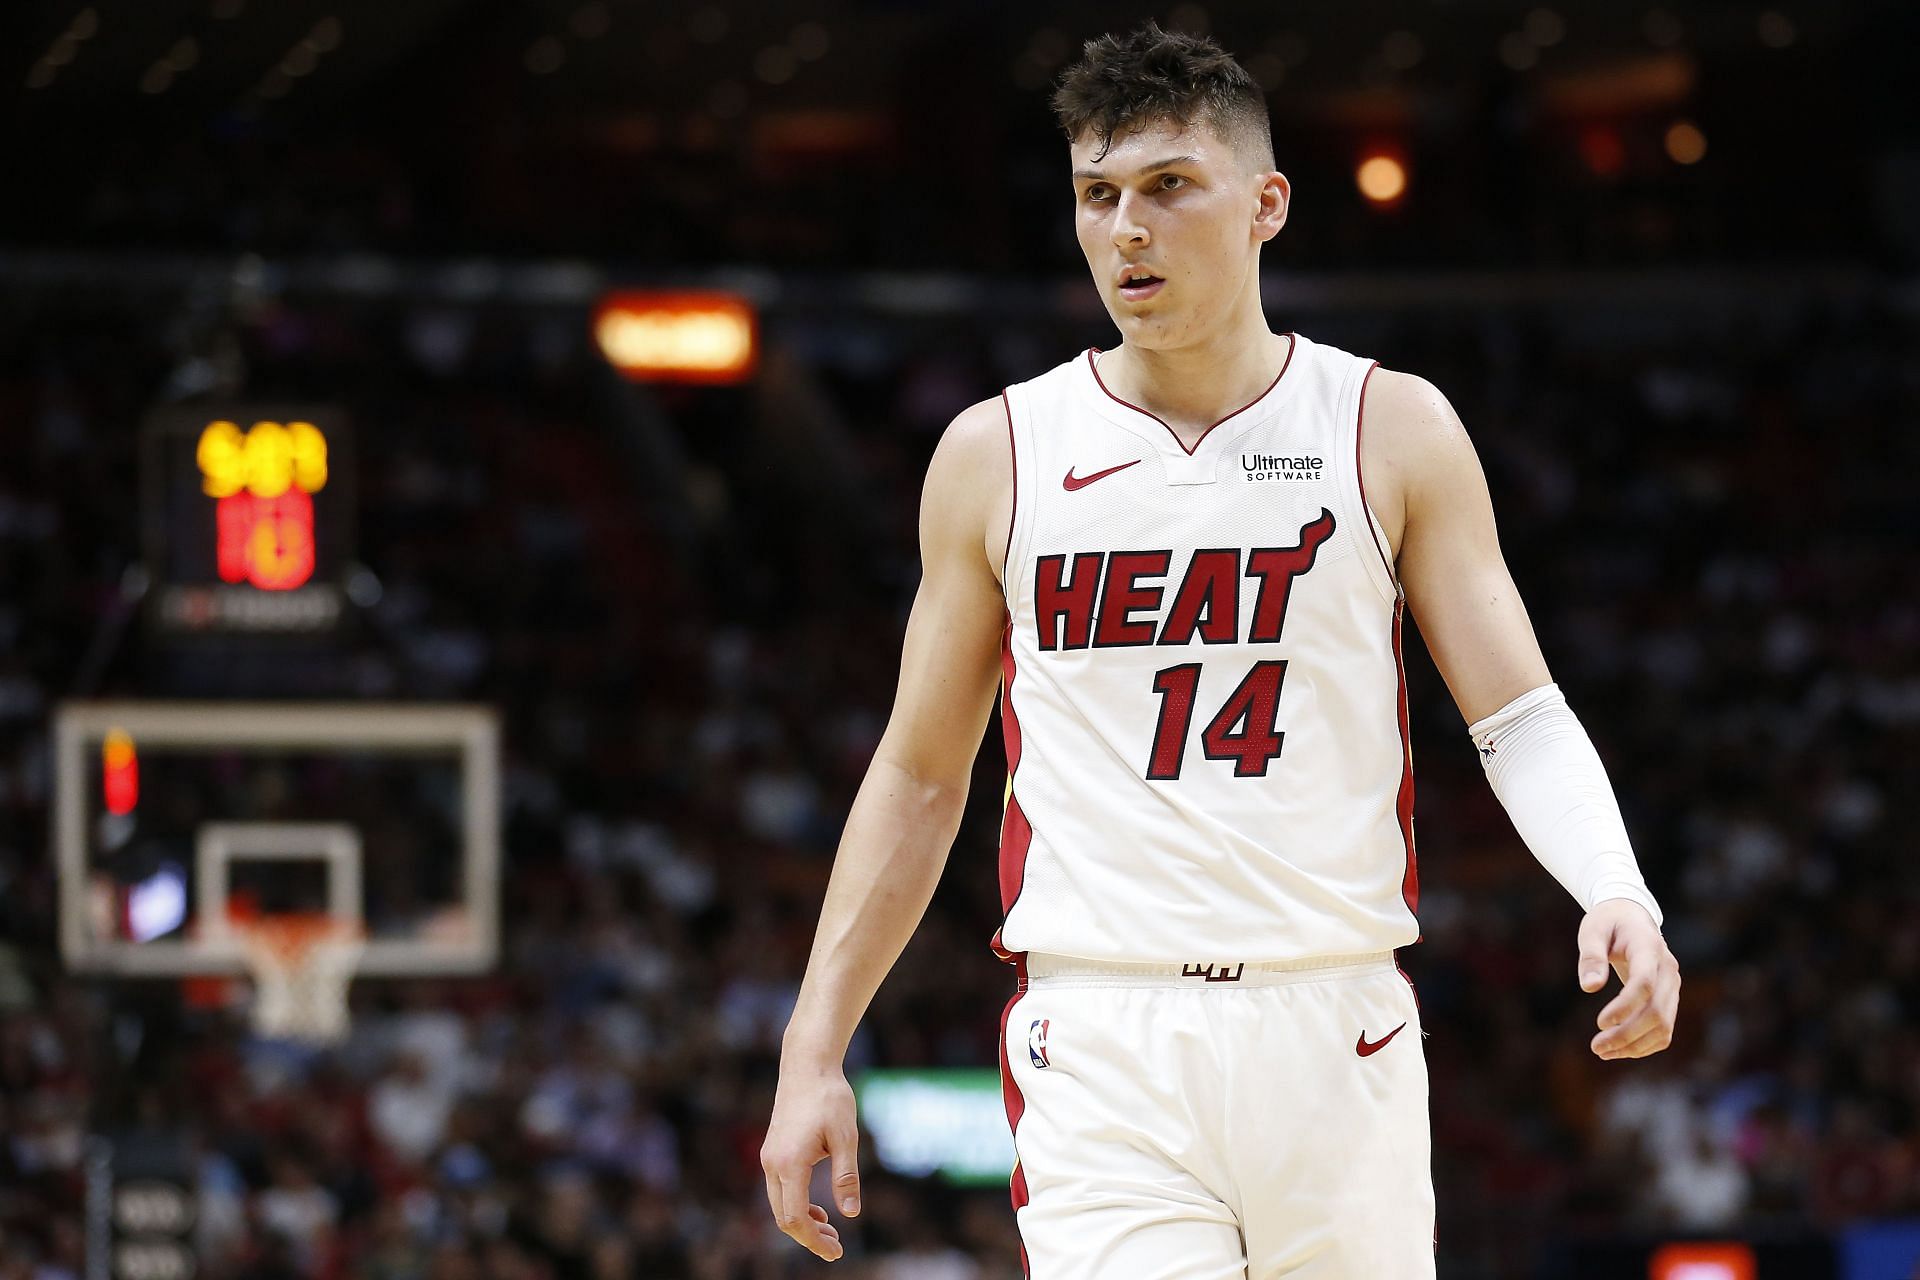 Miami Heat guard Tyler Herro continues to be a favorite for NBA Sixth Man of the Year